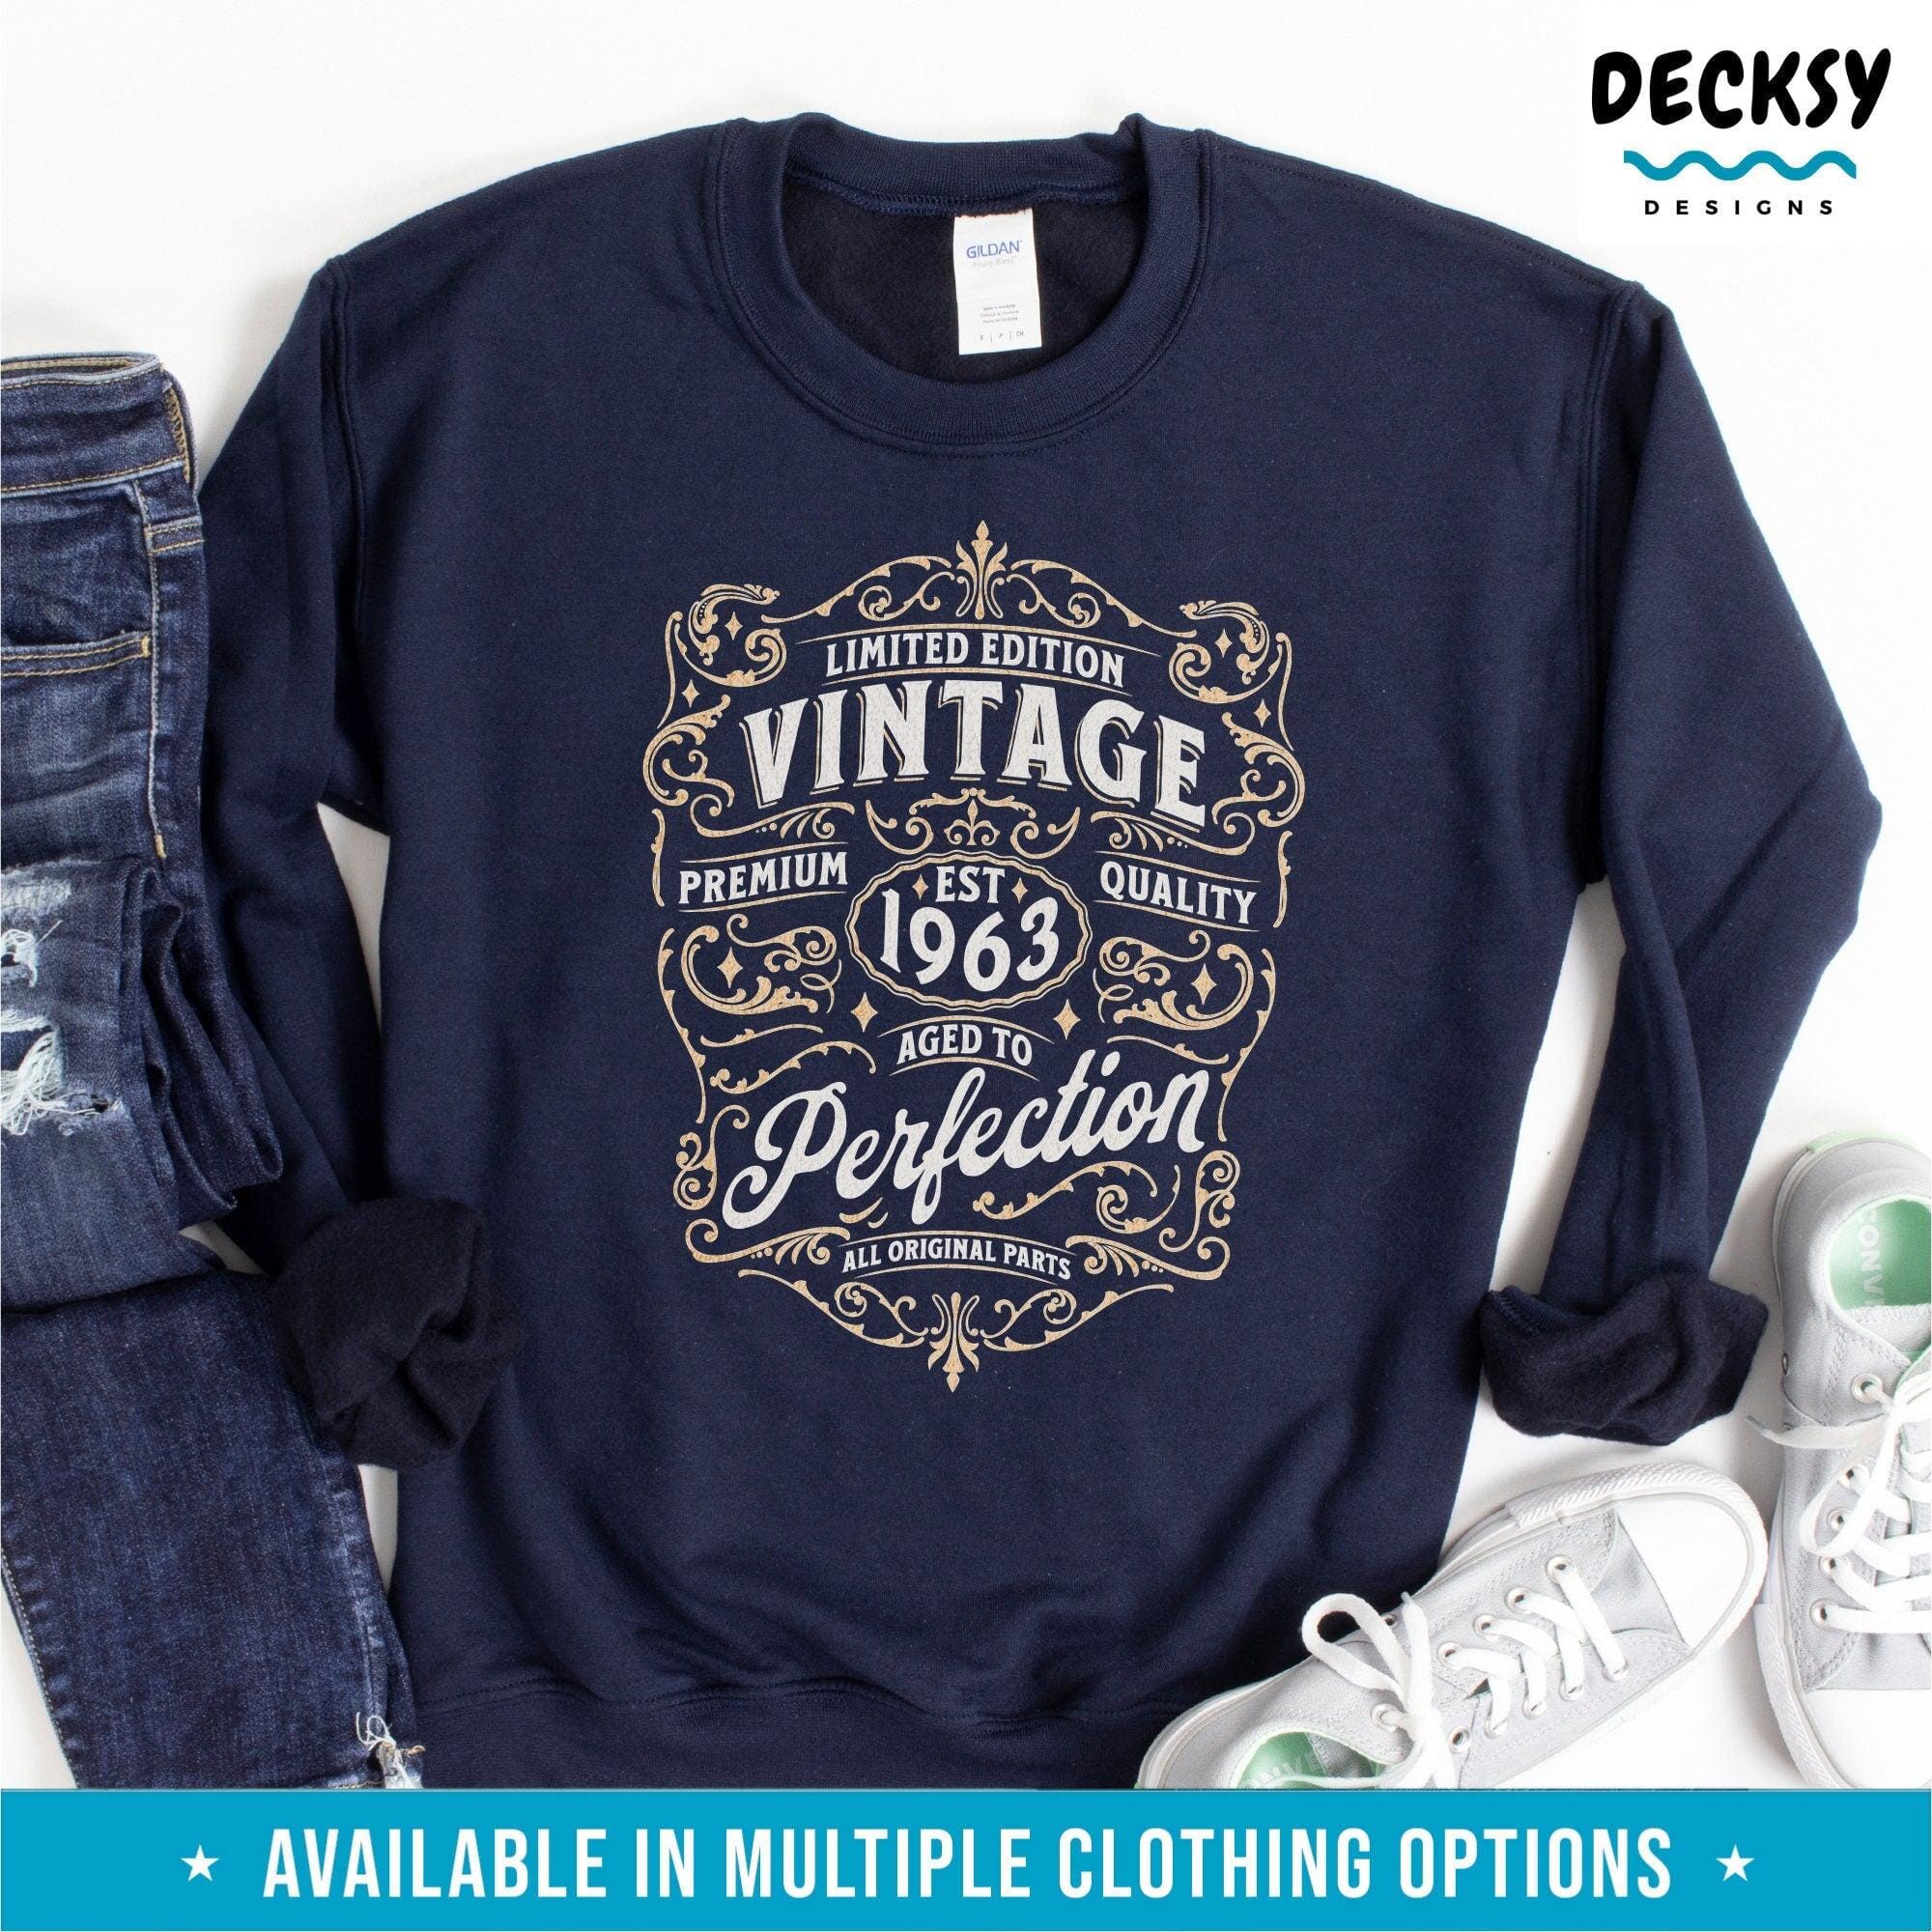 60th Birthday T-Shirt Gift, Vintage 1963 Aged To Perfection Tee-Clothing:Gender-Neutral Adult Clothing:Tops & Tees:T-shirts:Graphic Tees-DecksyDesigns